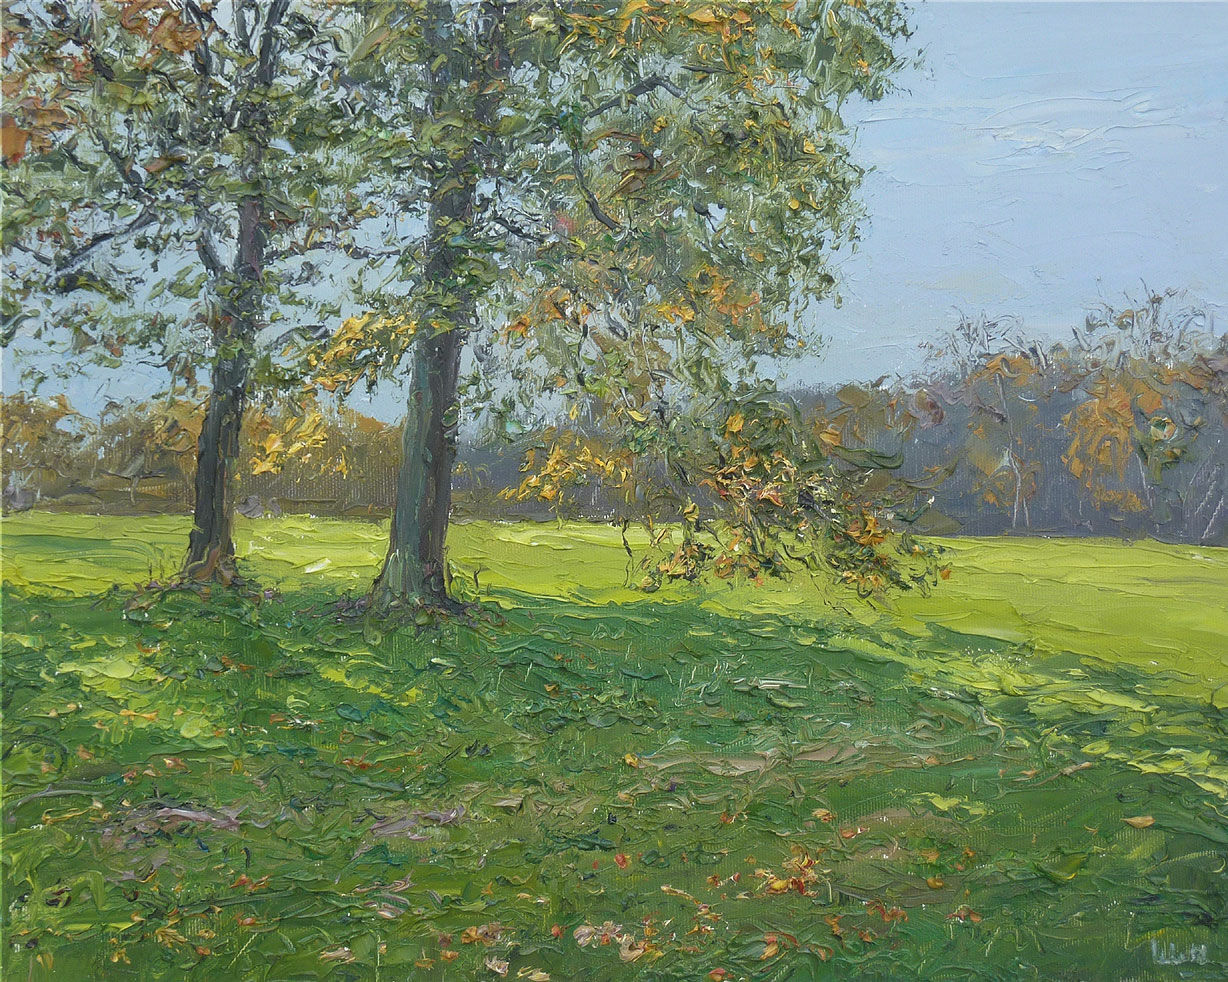 Picture "Autumn in the Park" (2023) (Original / Unique piece), on stretcher frame by Peter Witt